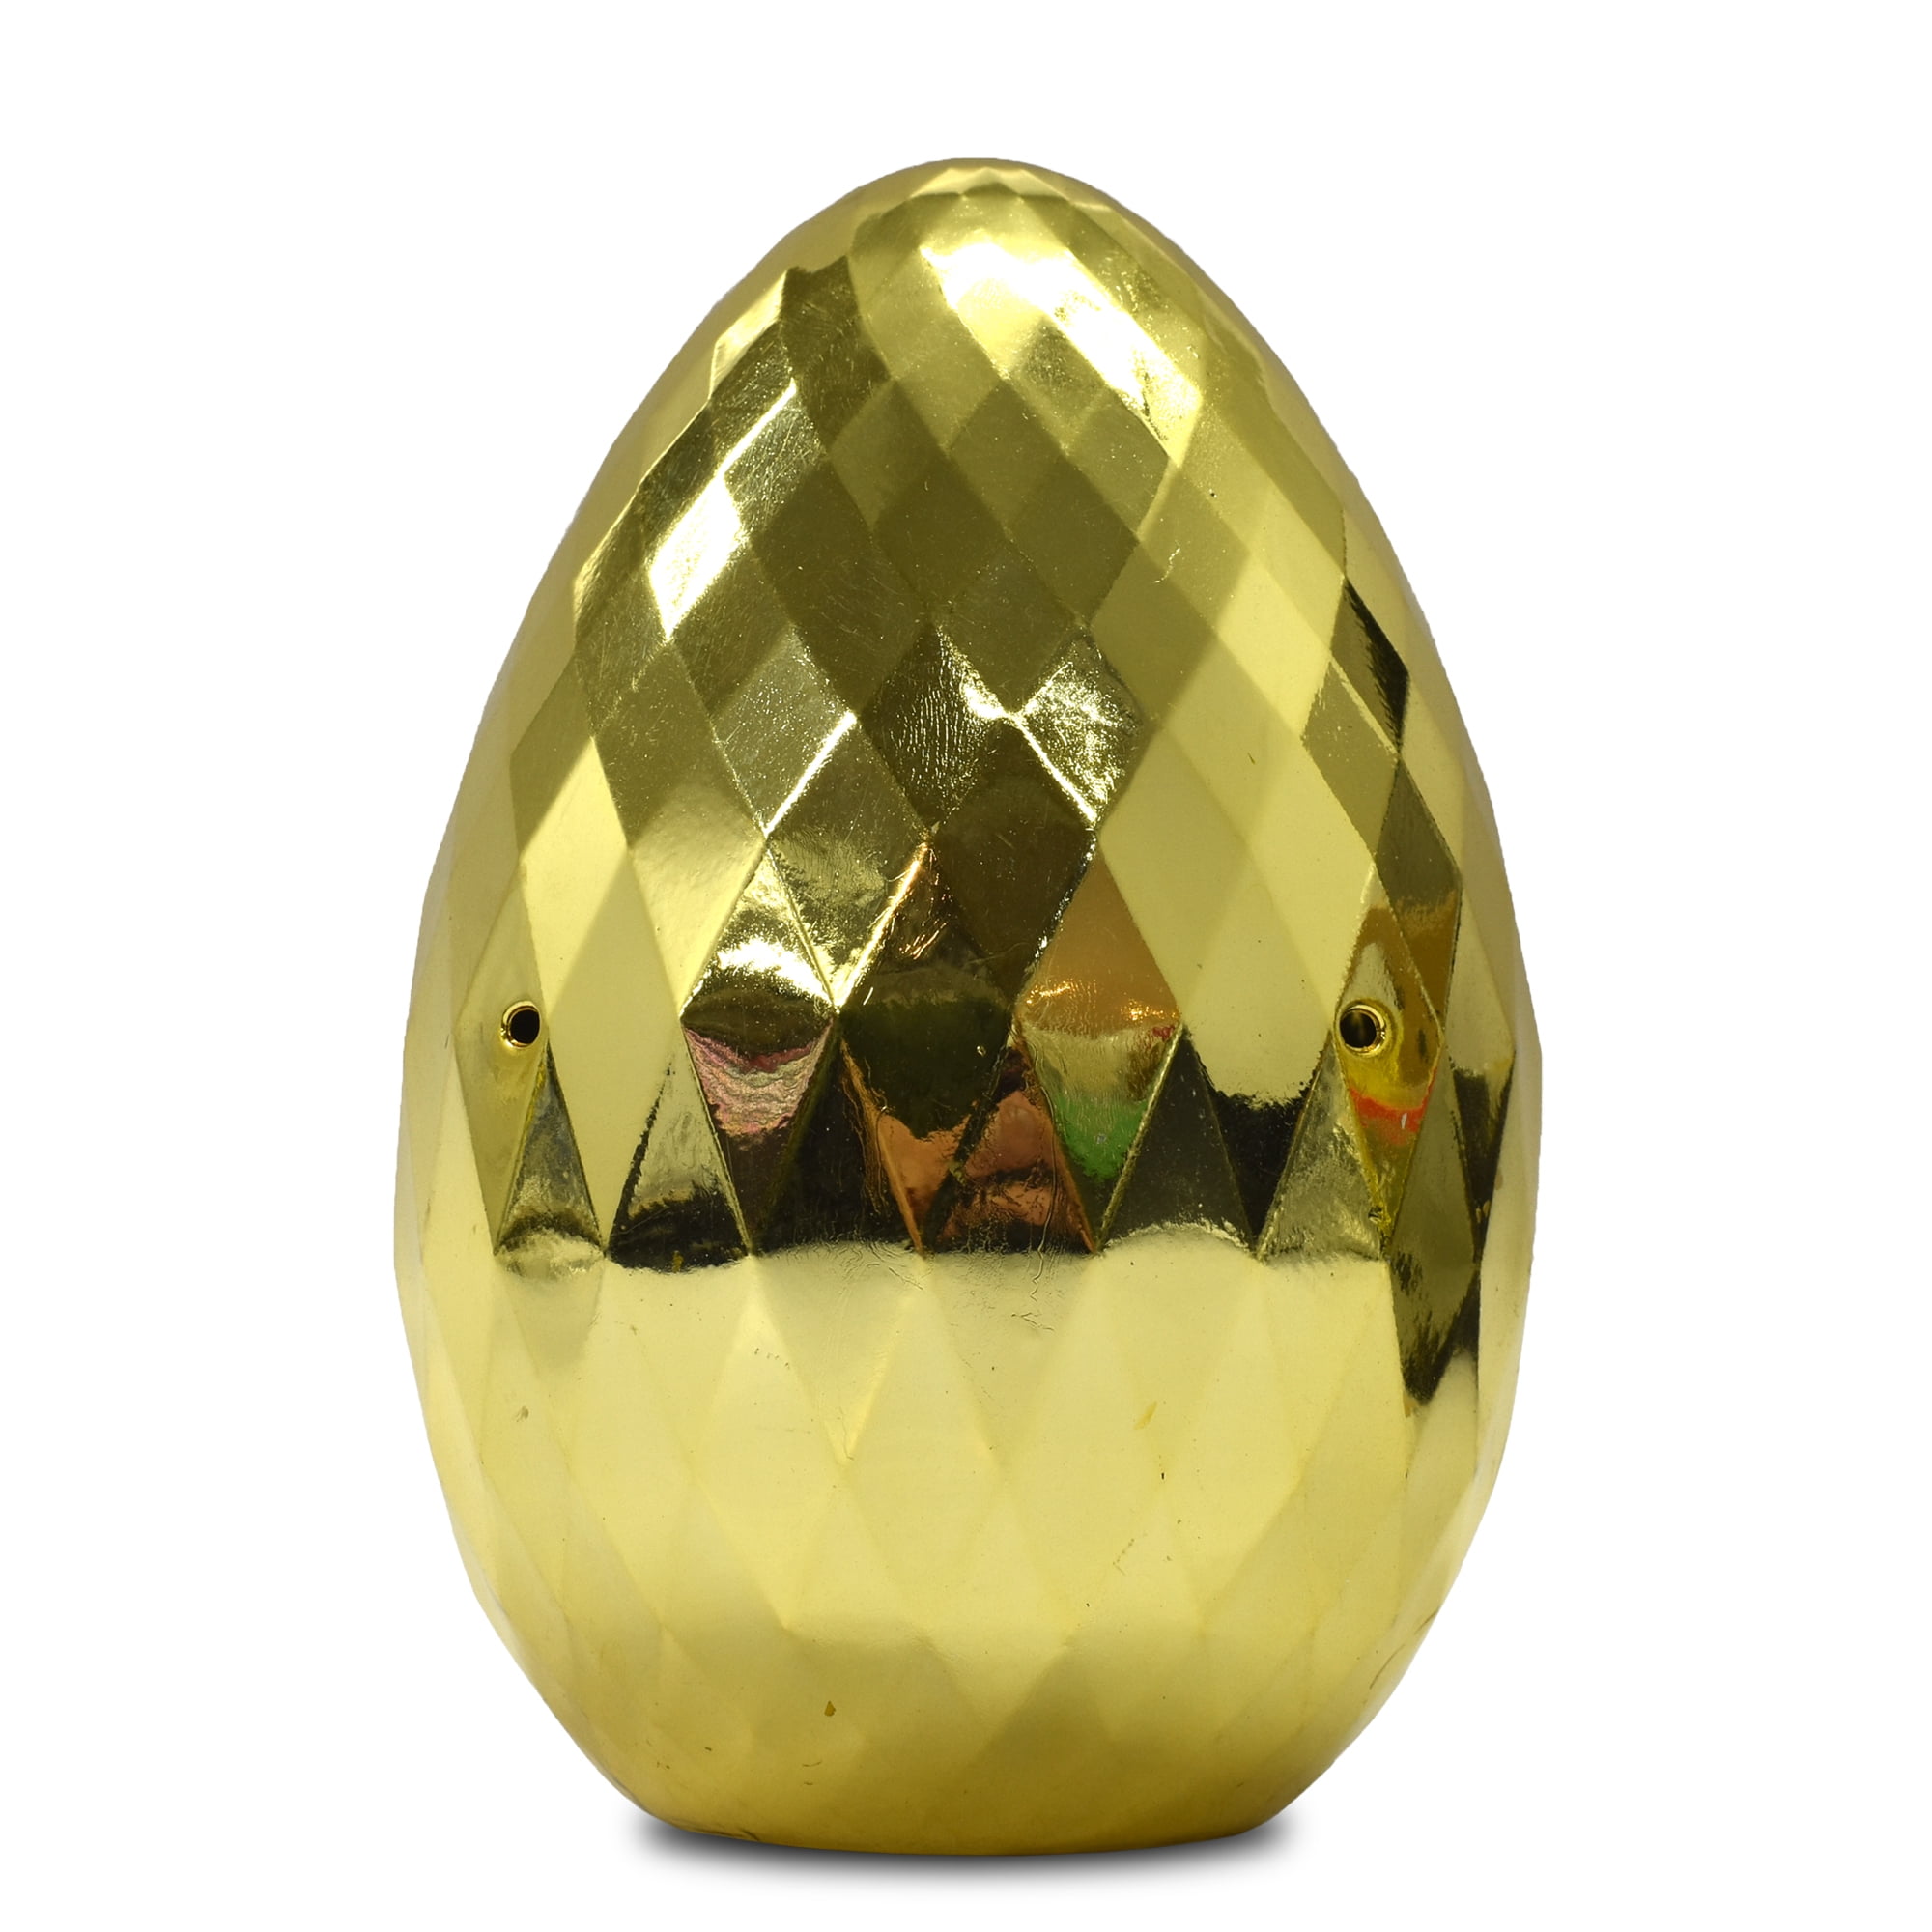 Way to Celebrate Easter Large Plastic Egg Container Gold - 1 Piece/Pack